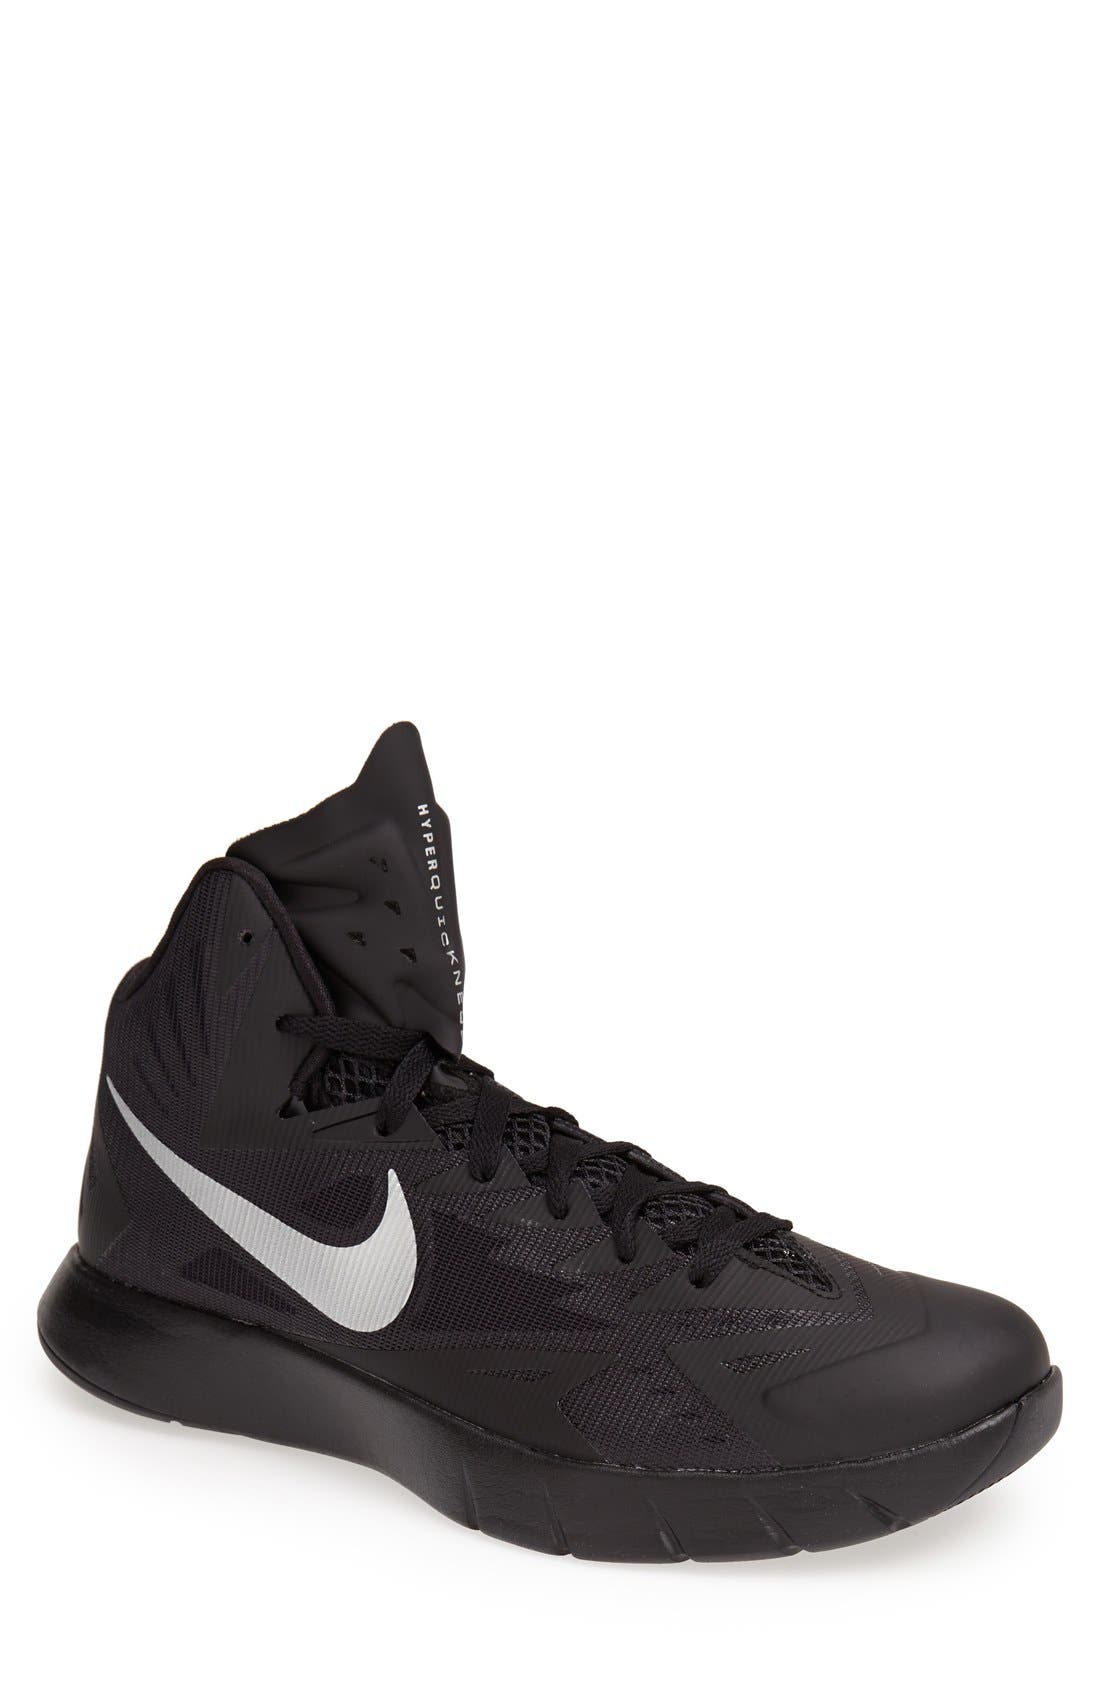 nike hyper quickness basketball shoes